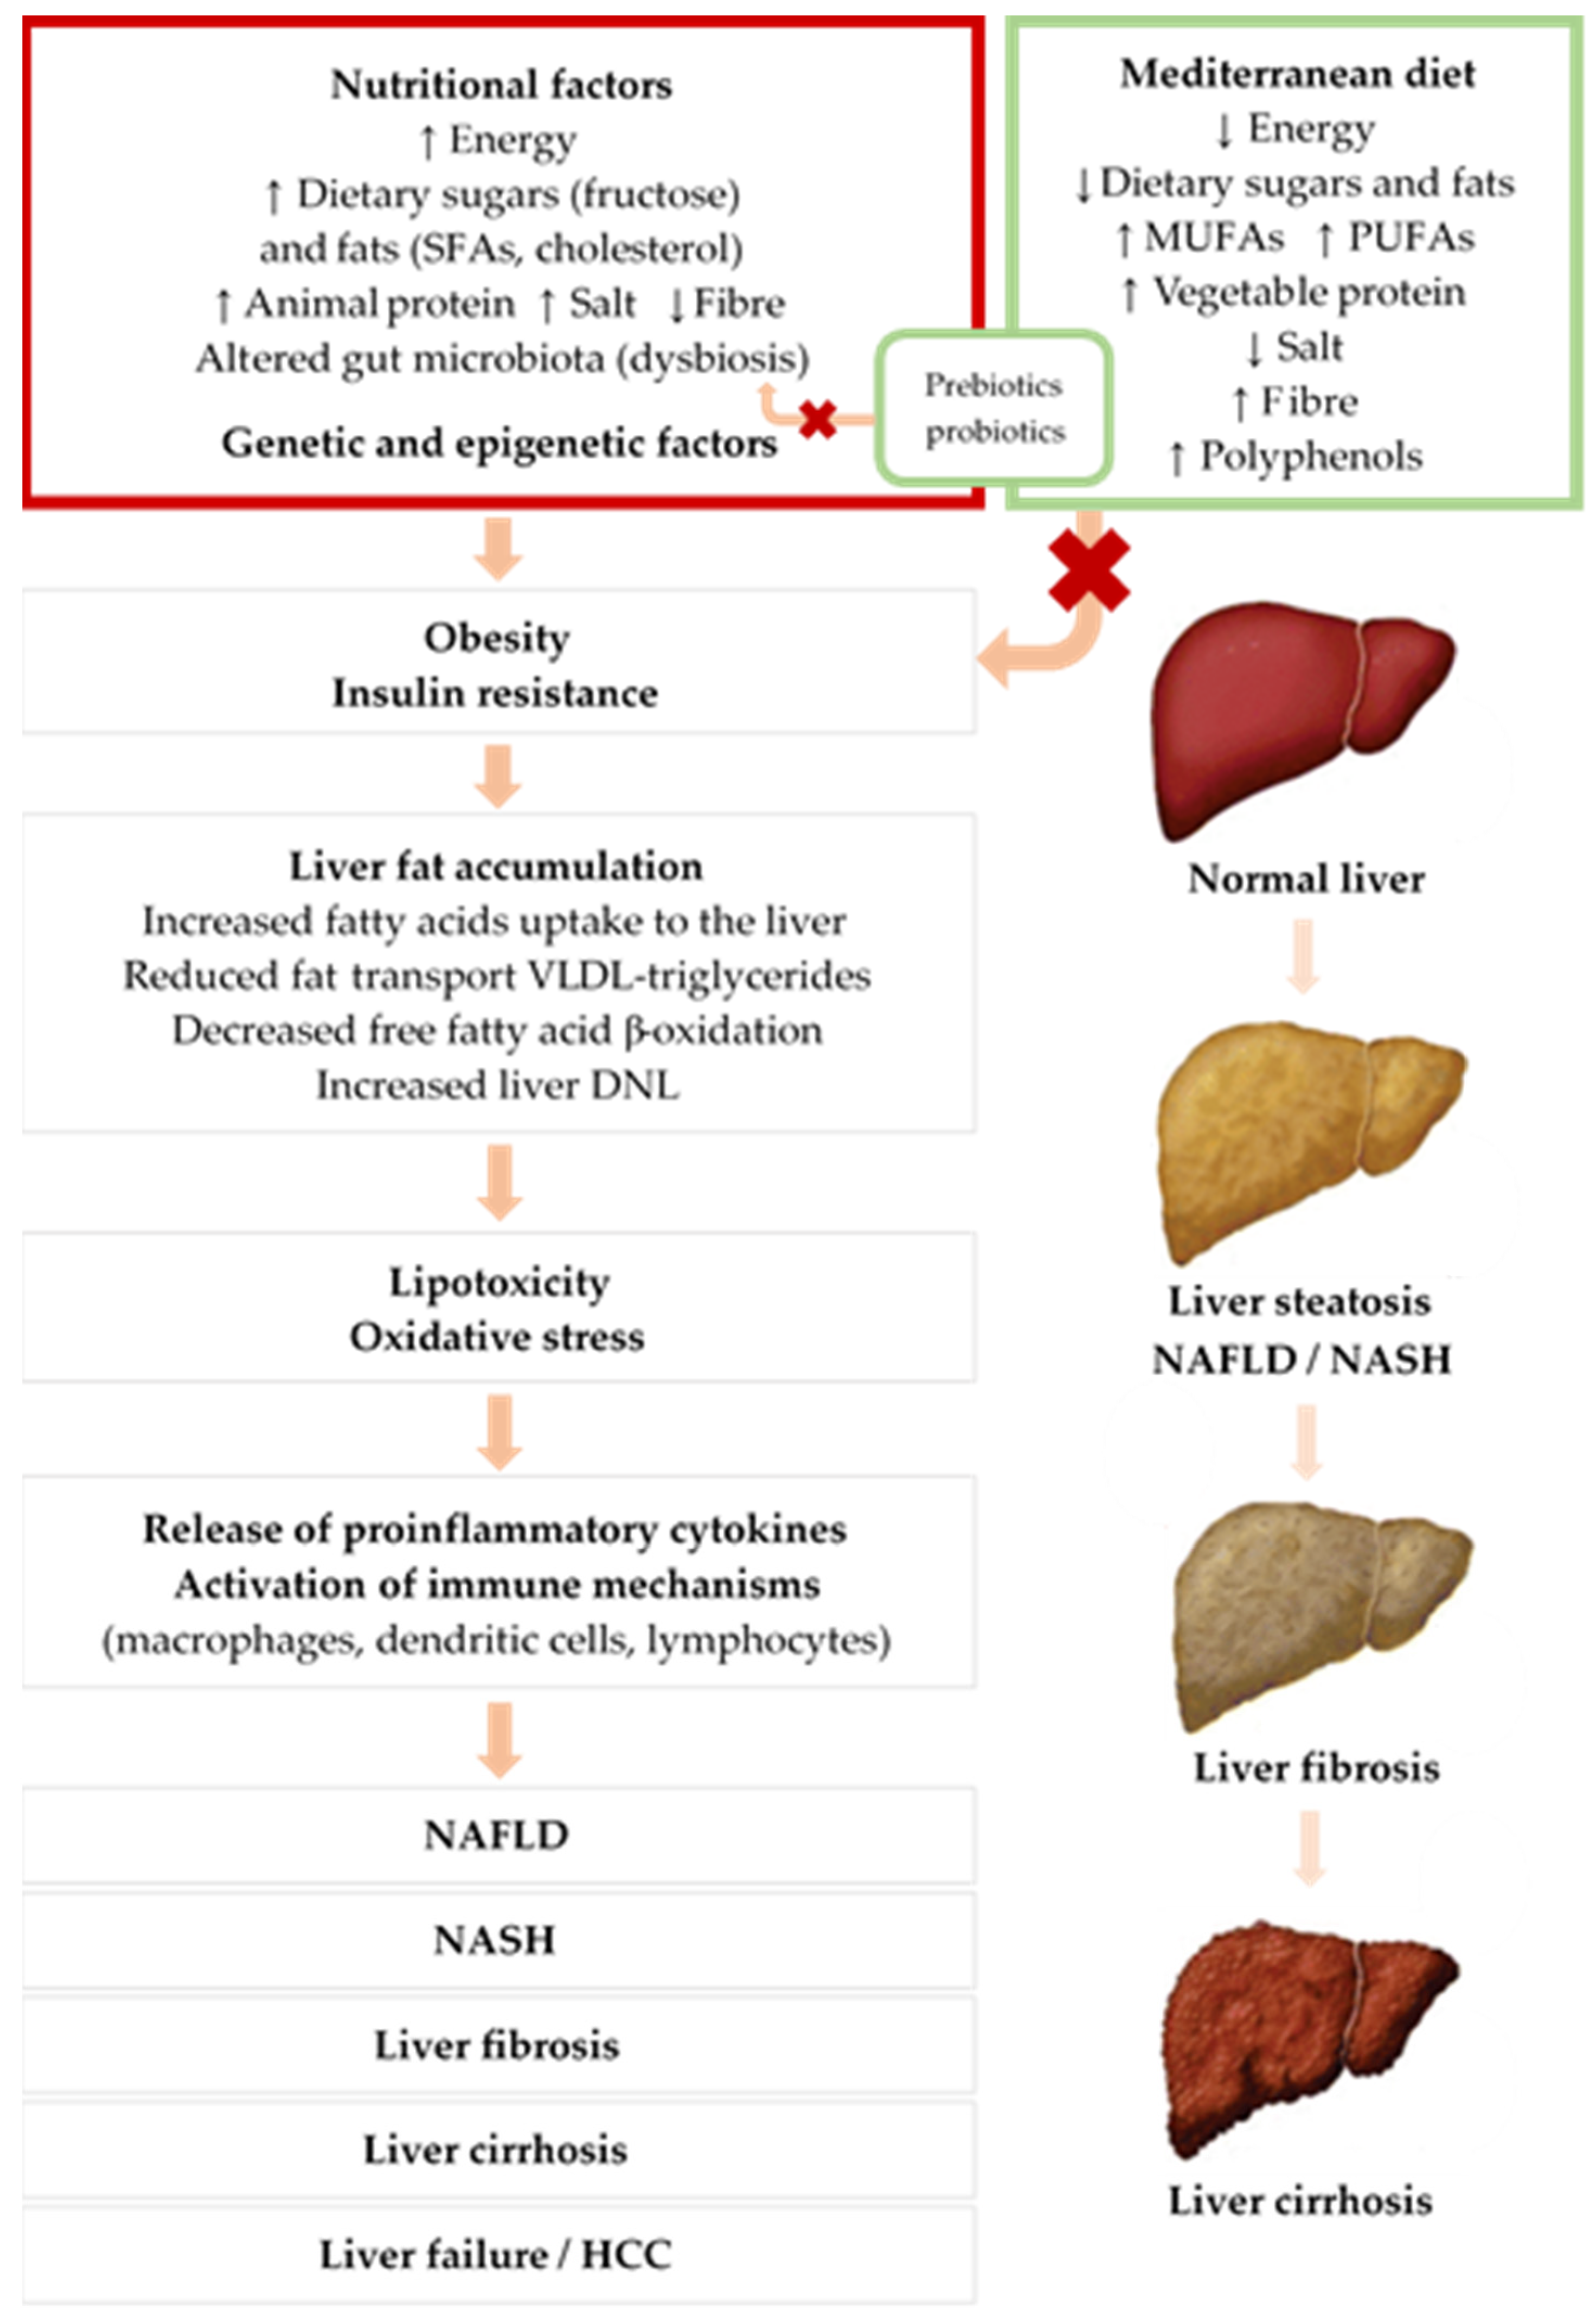 Nutrients | Free Full-Text | Overview of Non-Alcoholic Fatty Liver Disease  (NAFLD) and the Role of Sugary Food Consumption and Other Dietary  Components in Its Development